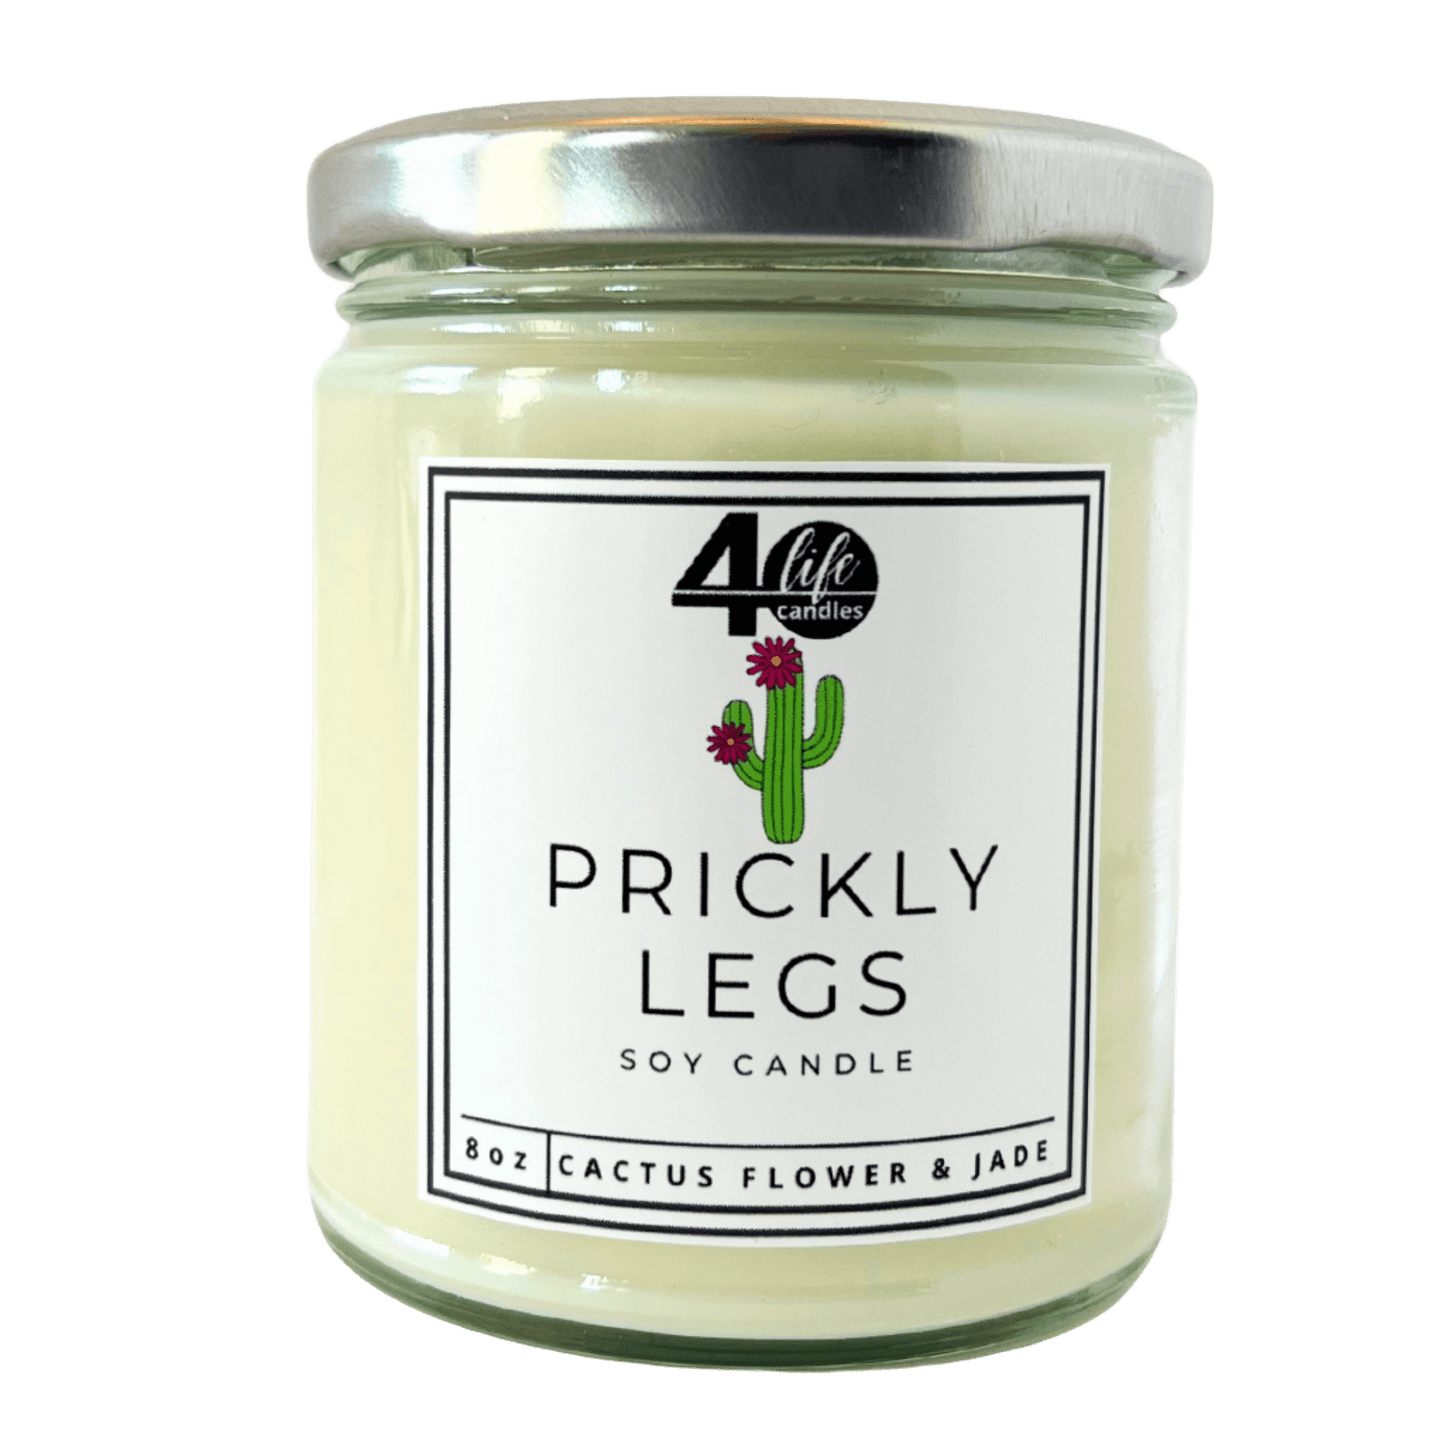 Prickly Legs soy candle